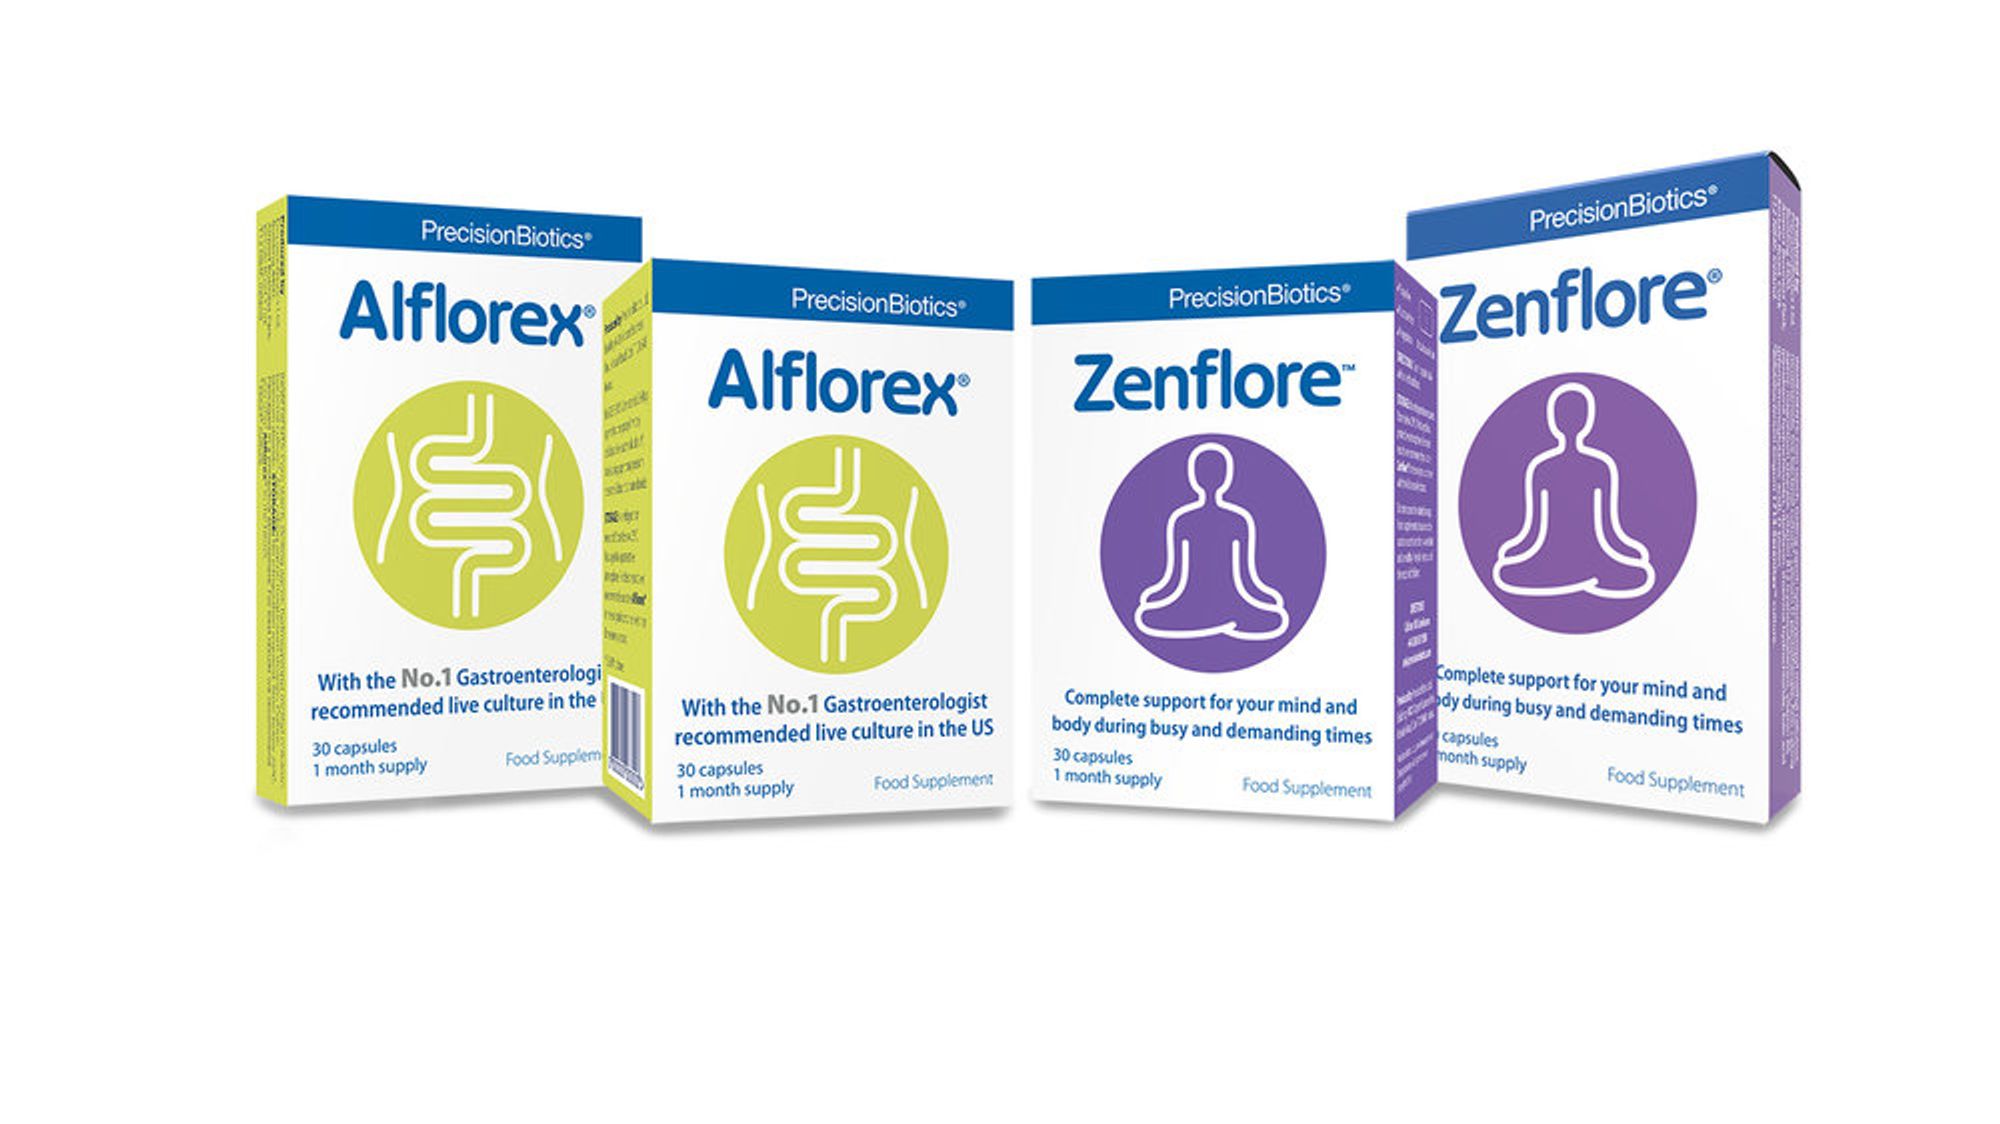 Figure 11: Alflorex and Zenflore’s old product packing. It’s Alflorex’s is white, blue and green, shows the shape of a stomach and intestines and says “with the No. 1 Gastroenterologist recommended live culture in the US”. Zenflore’s is white, blue and purple, shows the shape of a person sitting in lotus pose and says “complete support for your mind and body during busy and demanding times.”